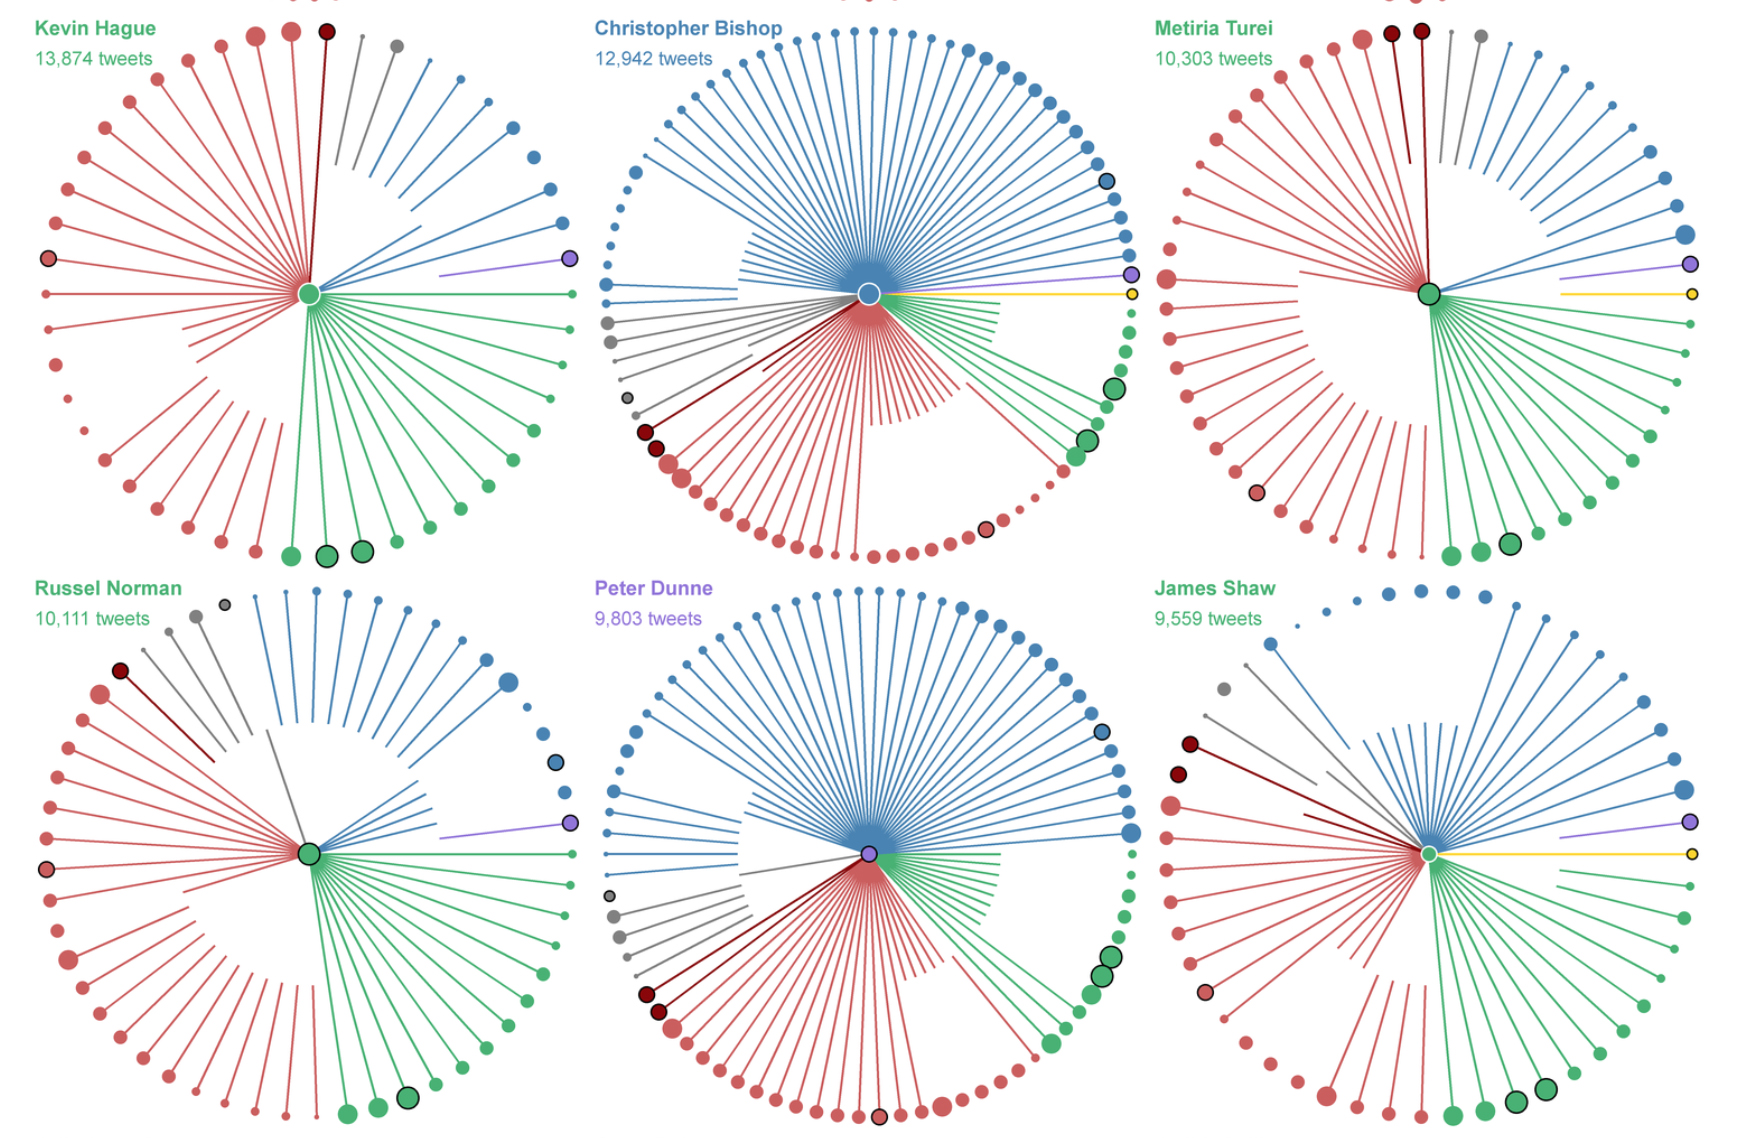 Visualising New Zealand Members of Parliament Twitter Networks